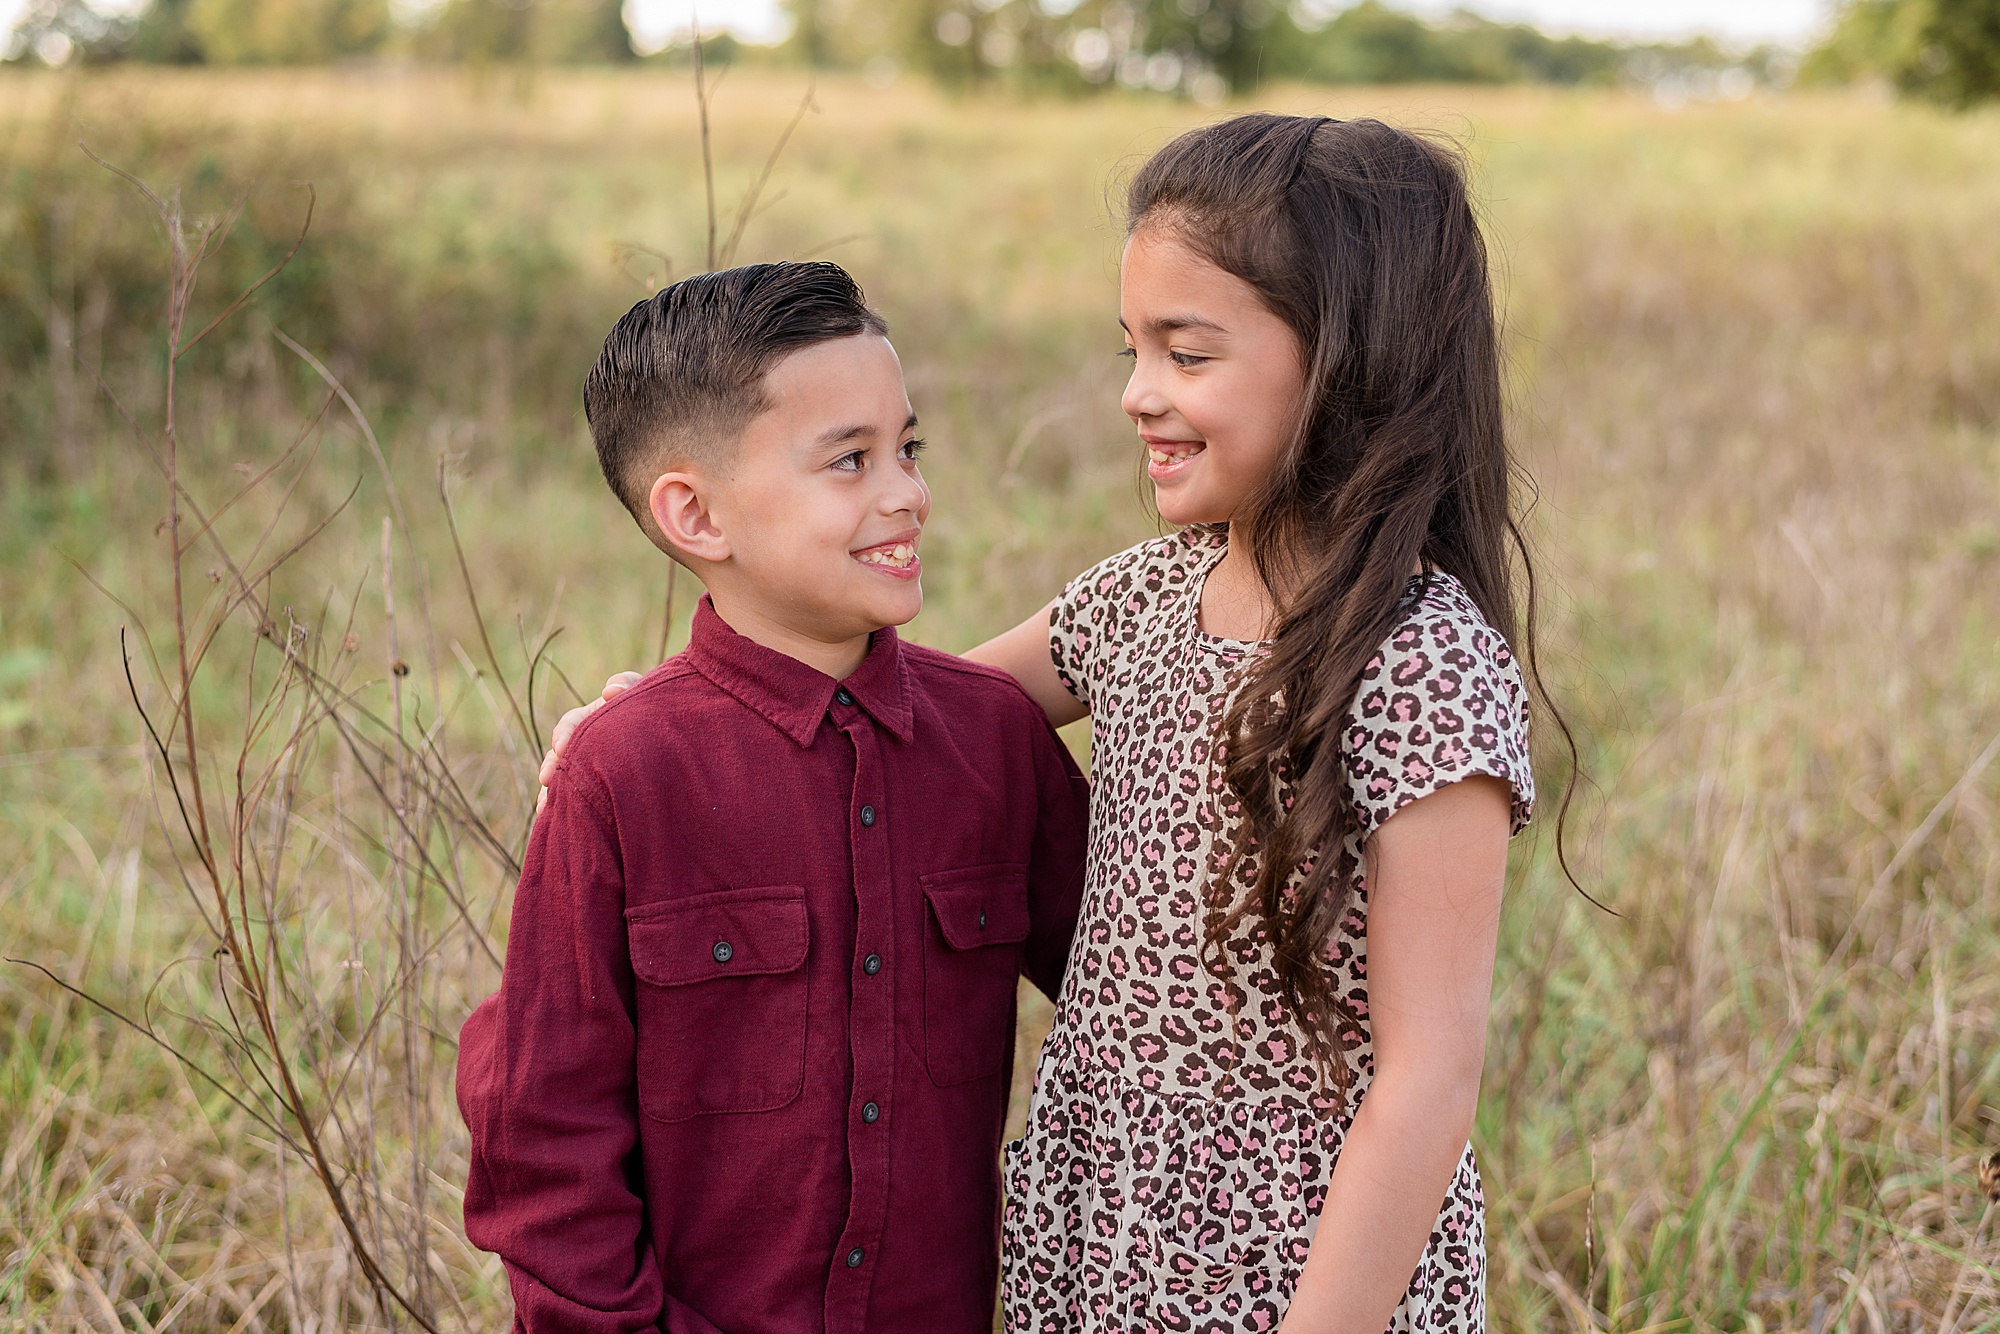 brother + Sister have arm around each other during family photos